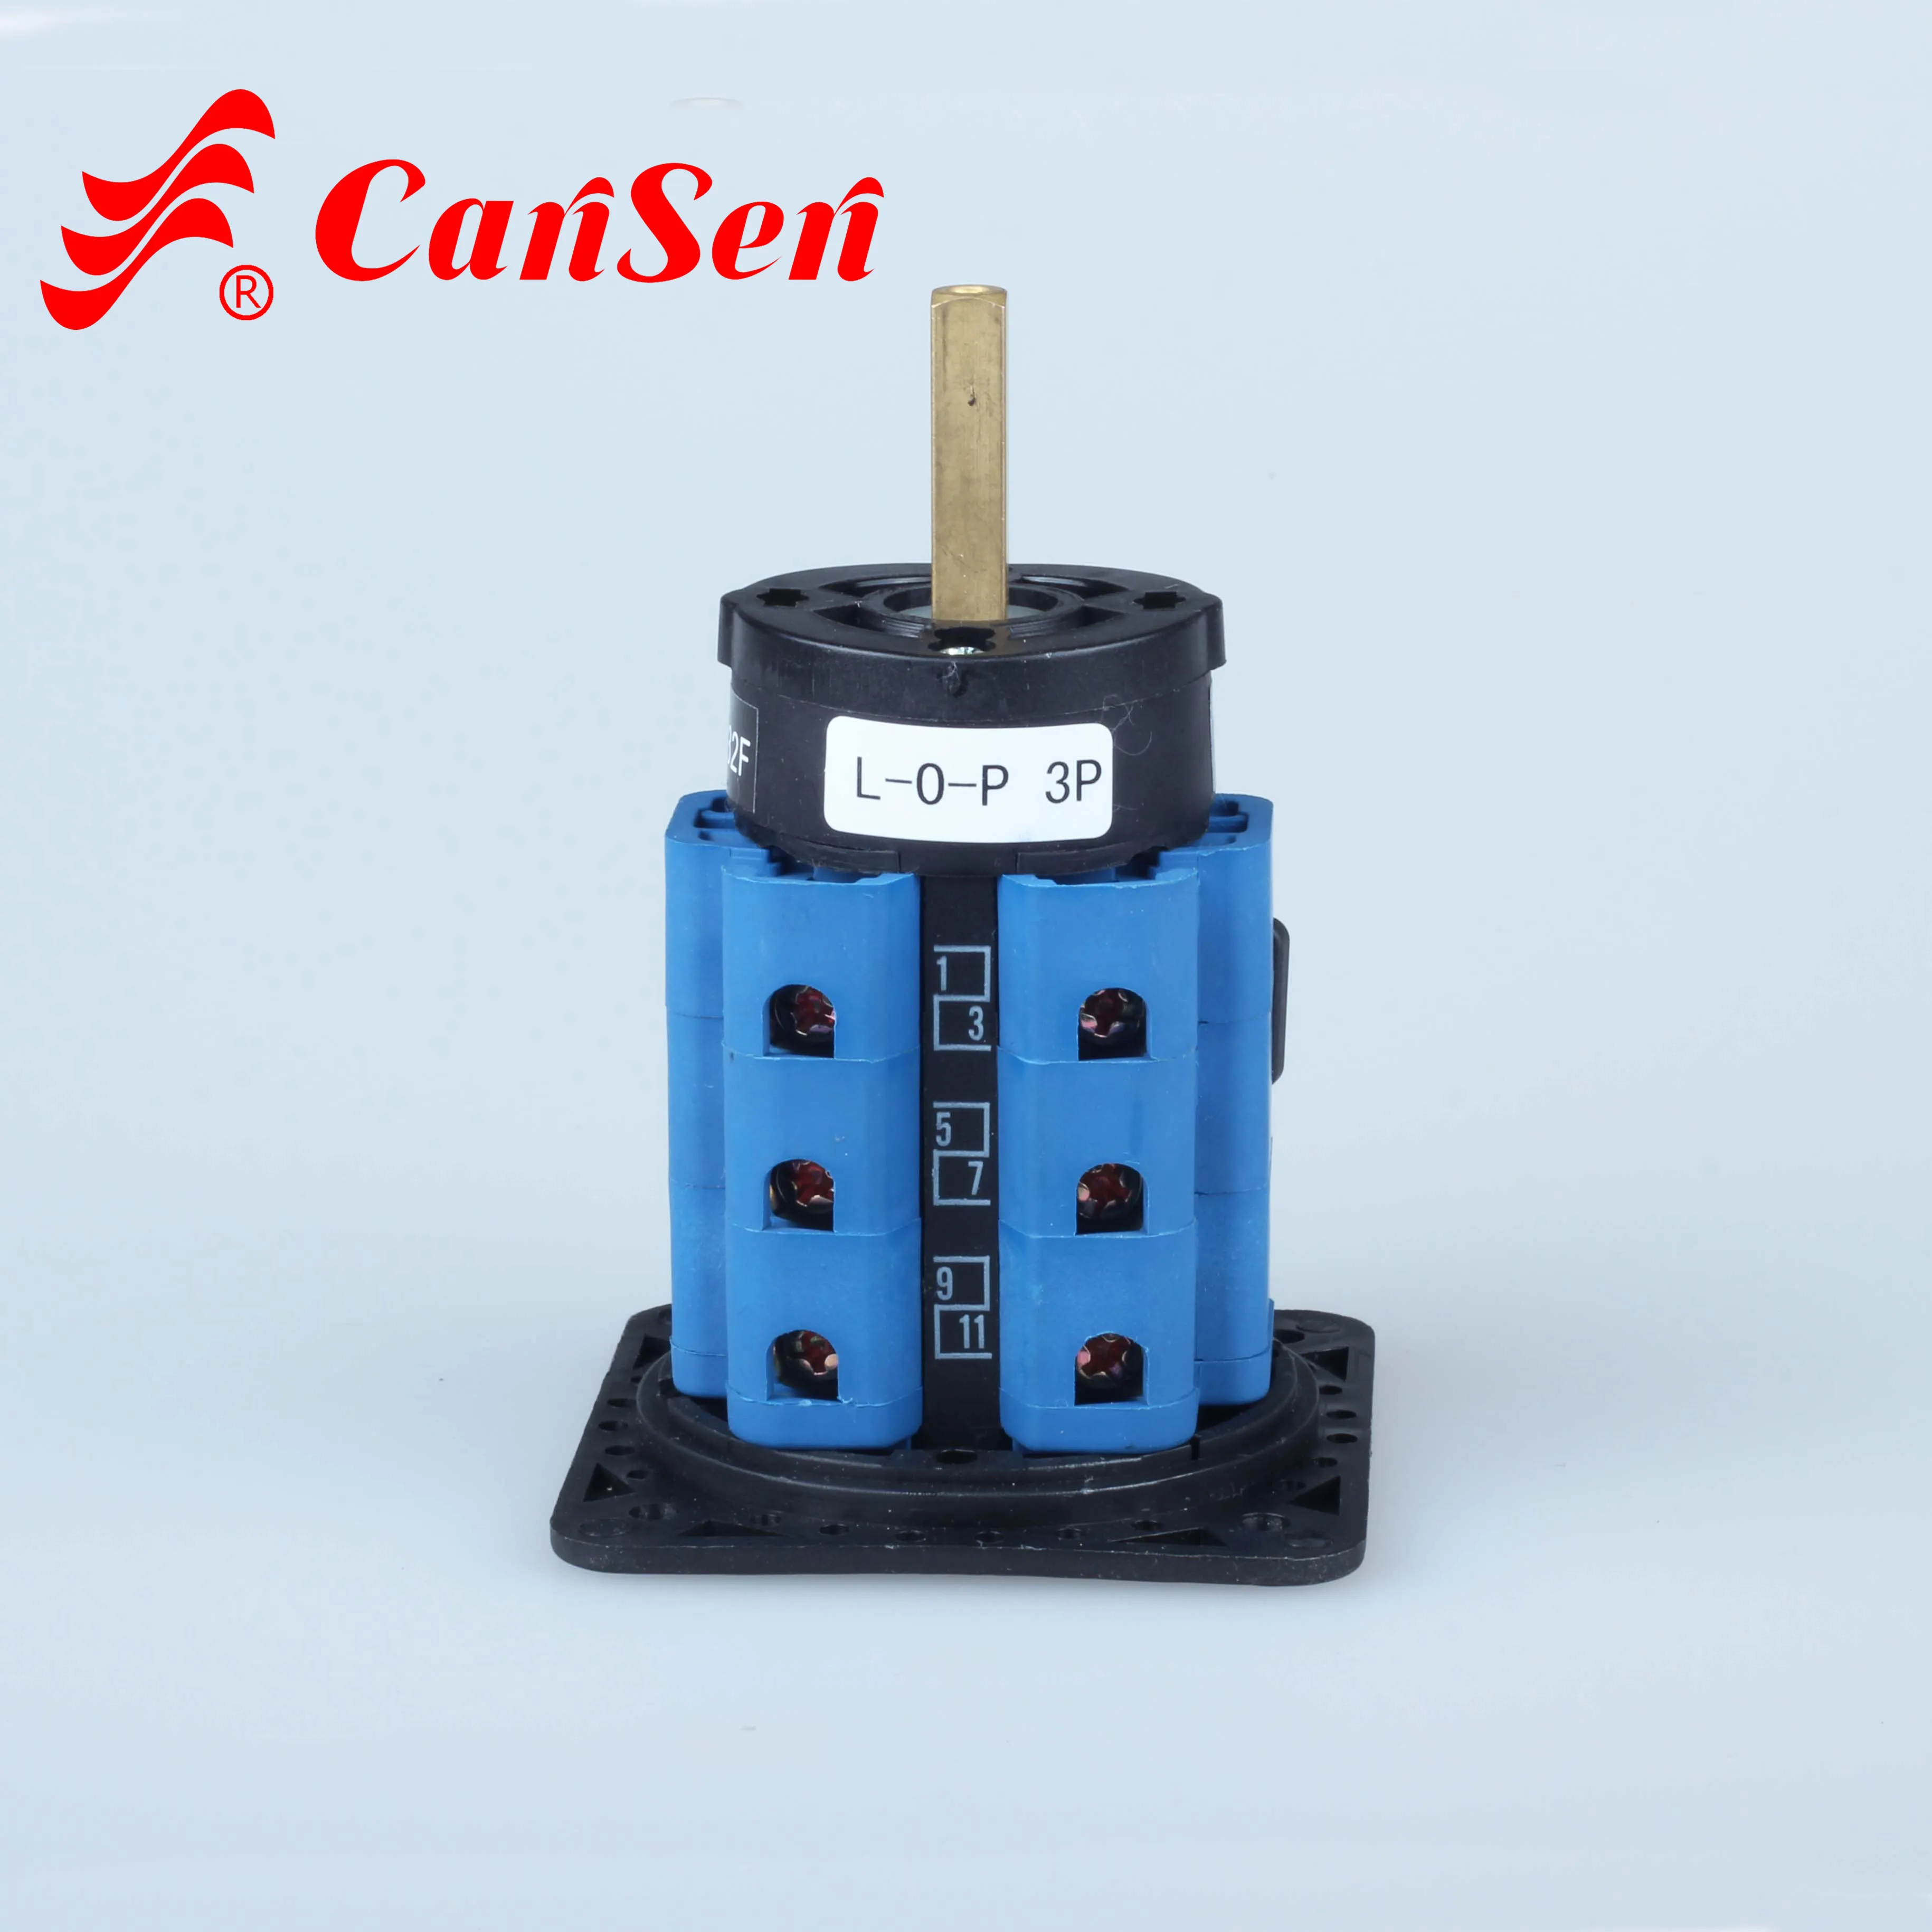 Cansen LW26-32F L-O-P finger protect long copper shaft 3 position rotary switch